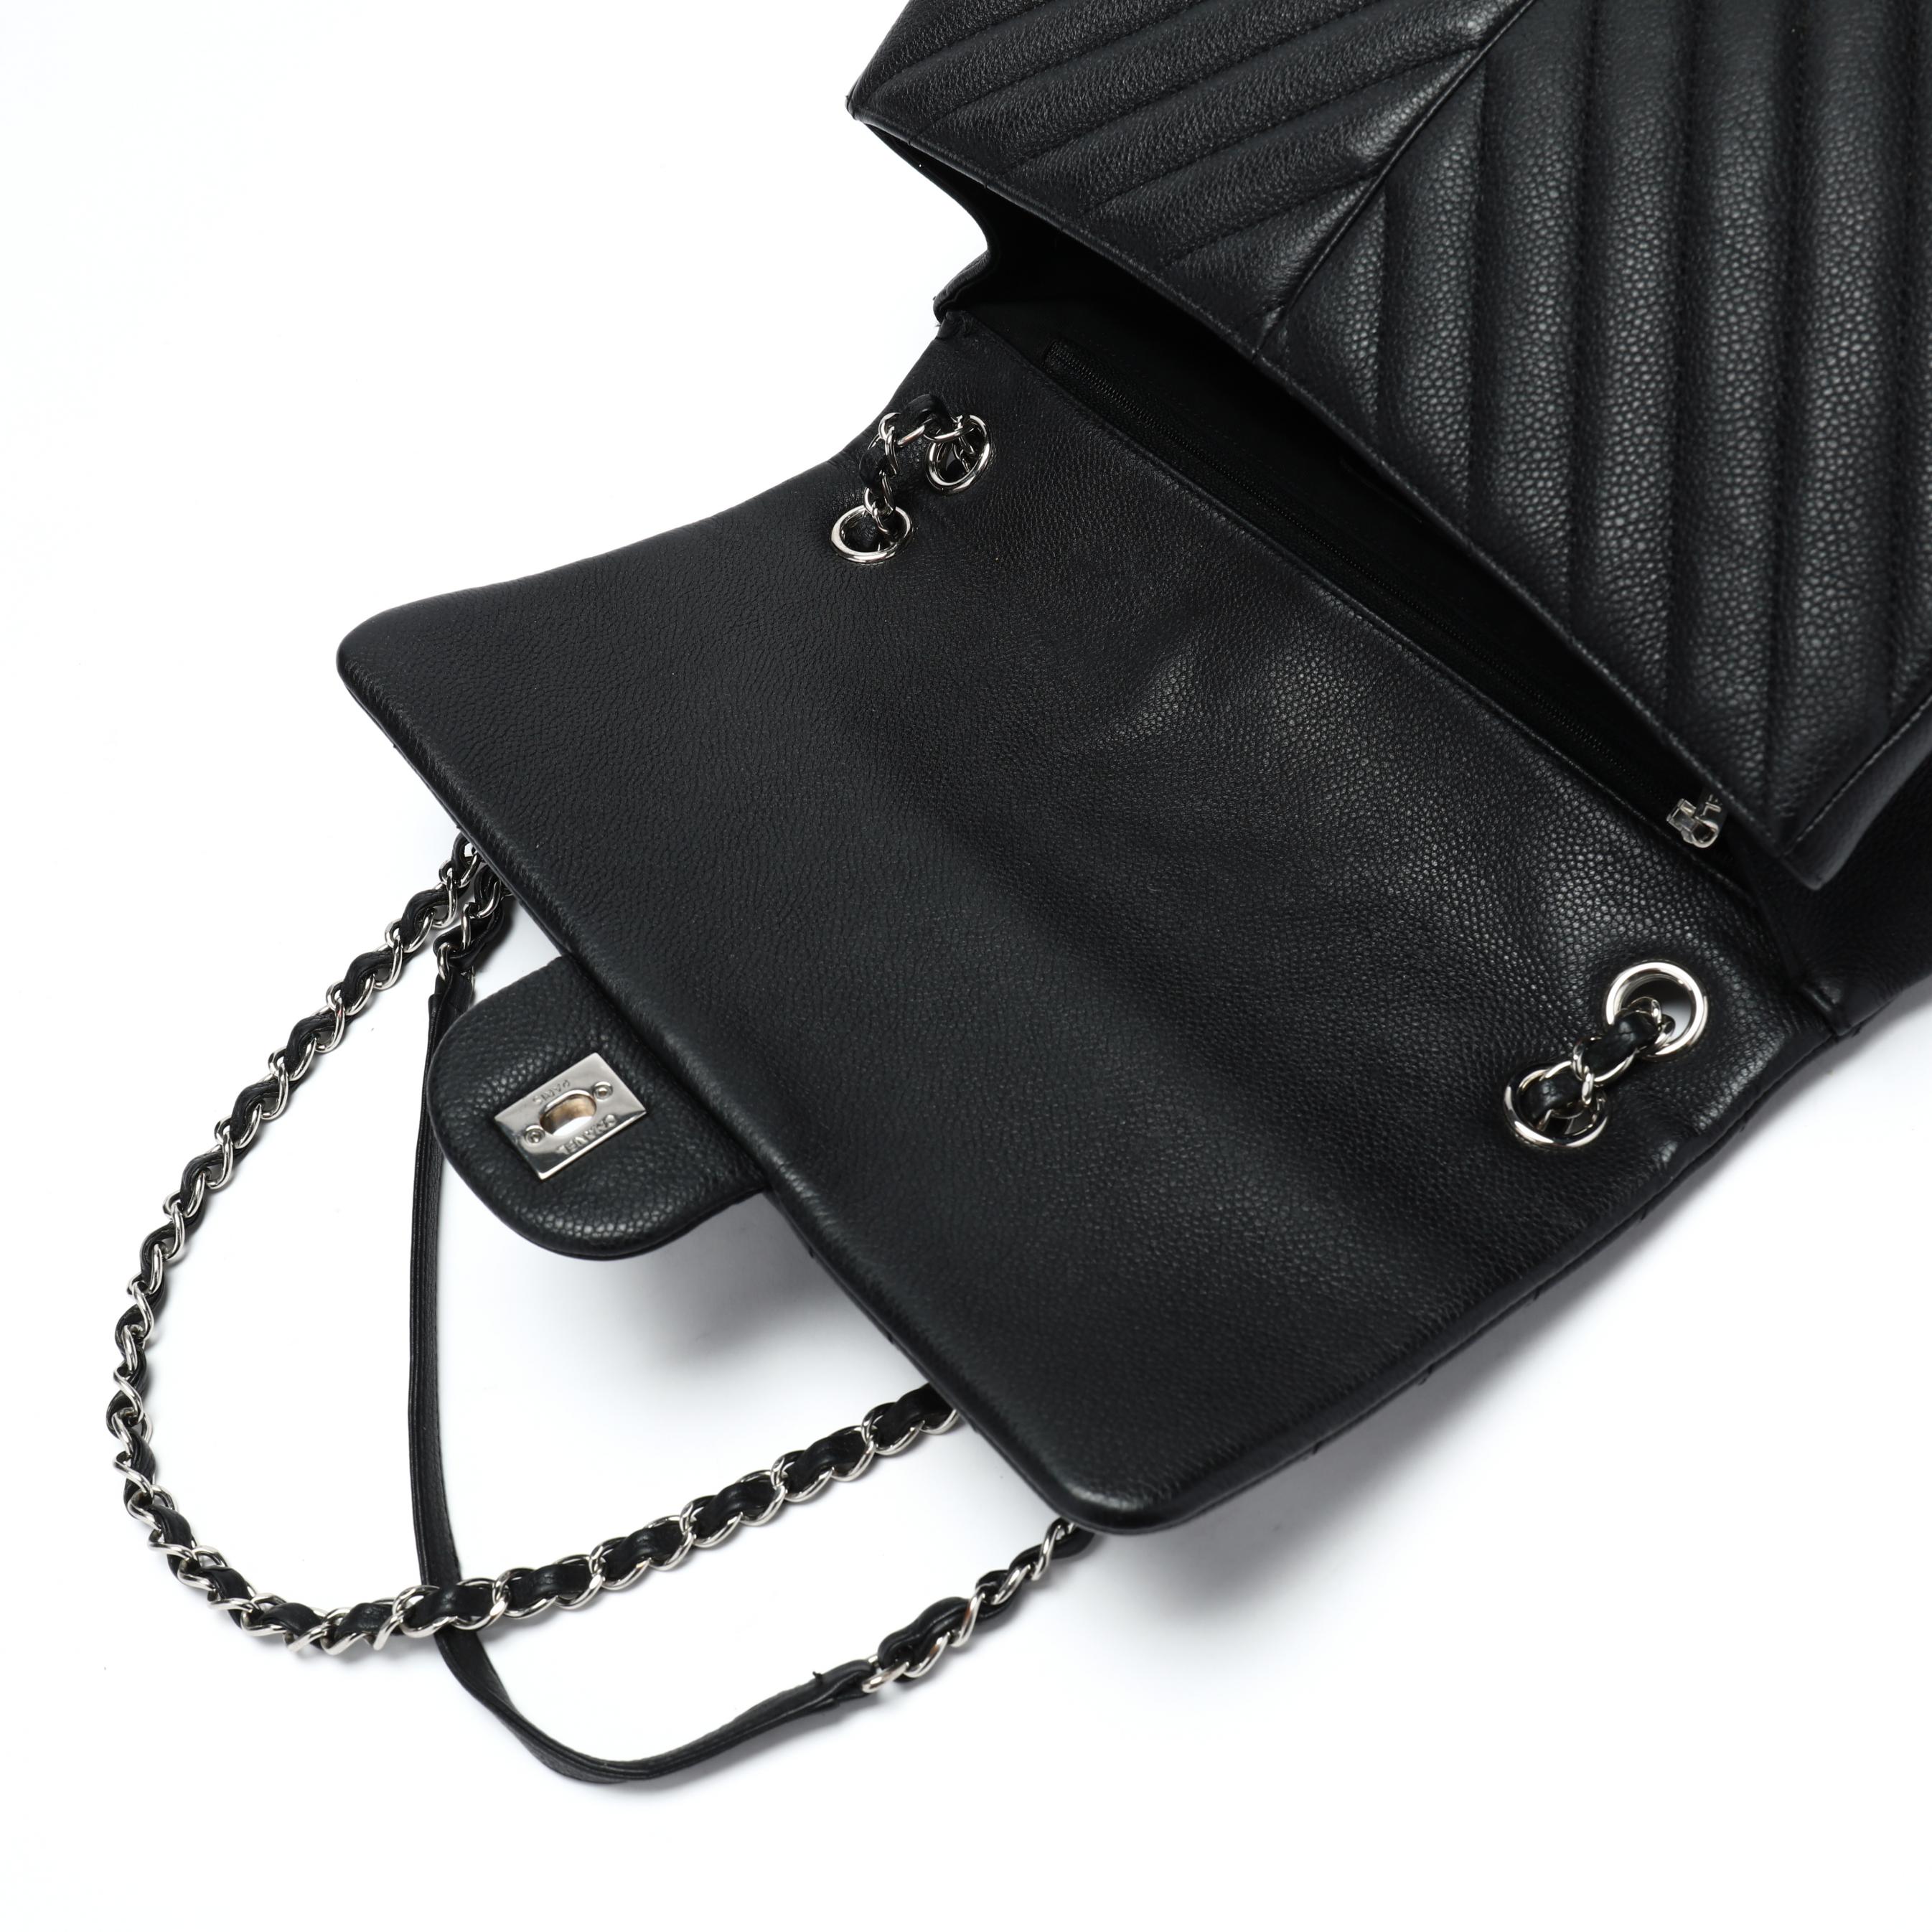 Sold at Auction: CHANEL - Jumbo Black Leather Flap Messenger